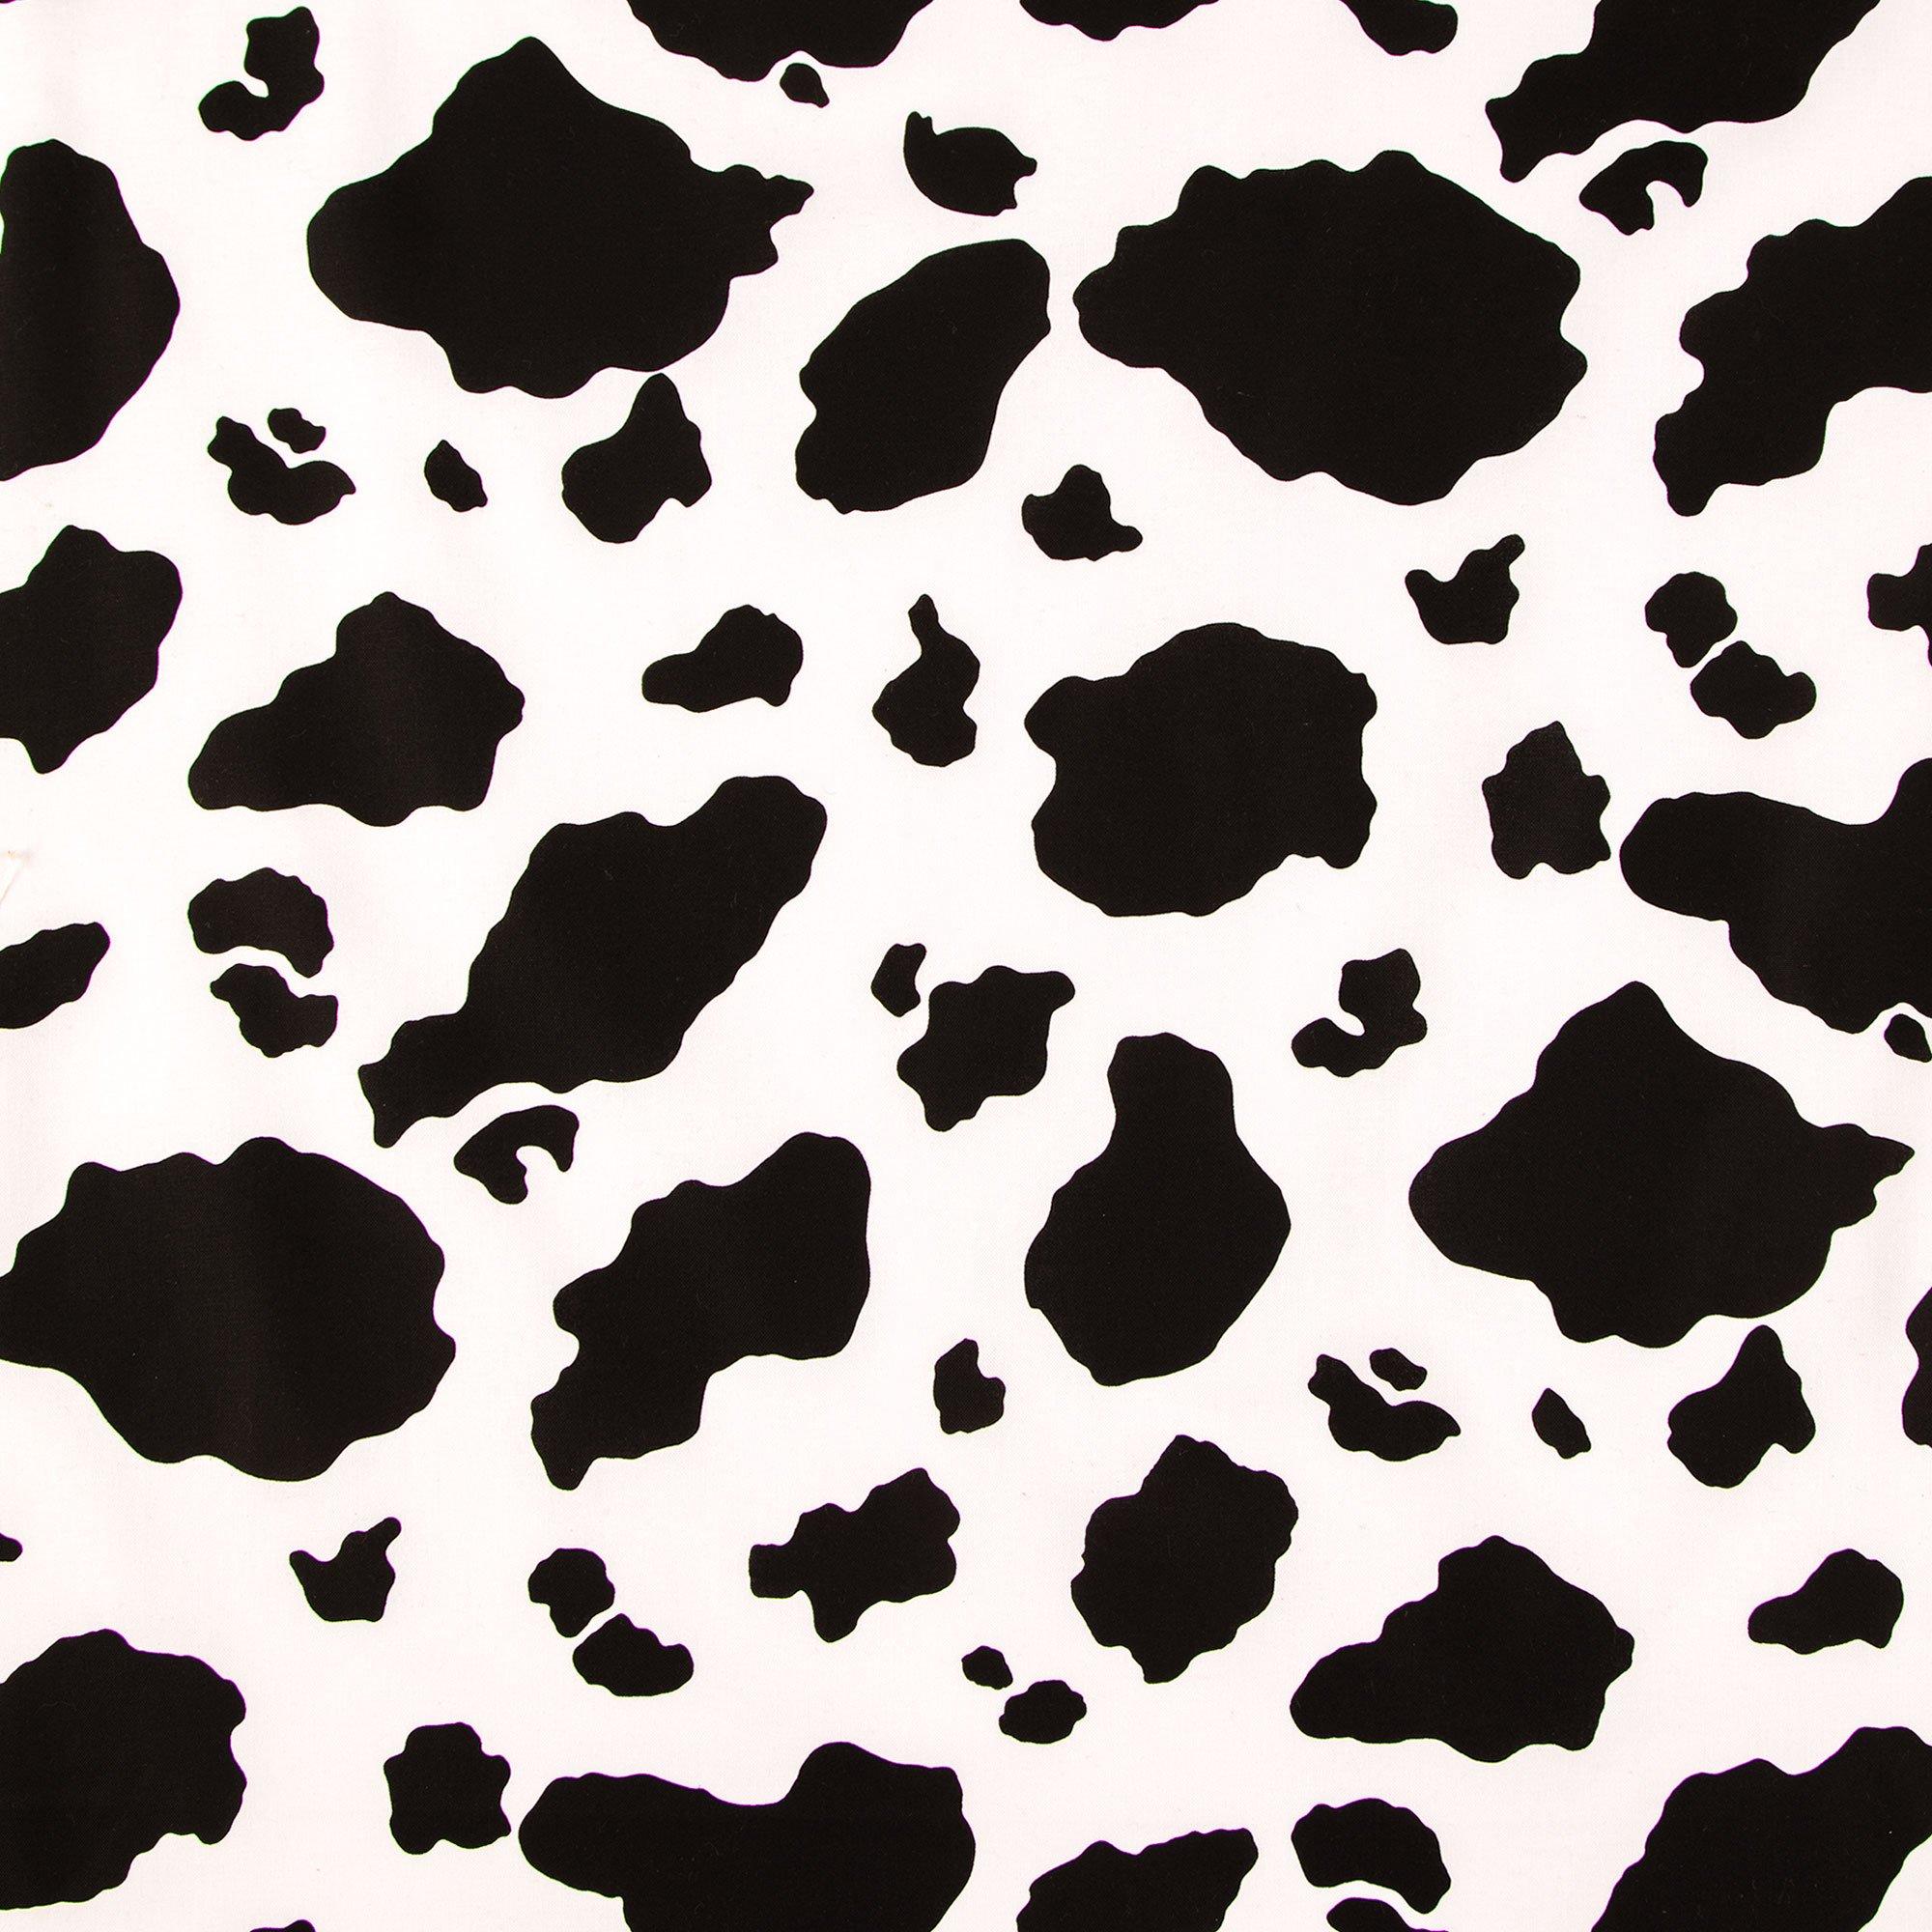 White & Brown Cow Print Suede Fabric, Hobby Lobby, 1854538